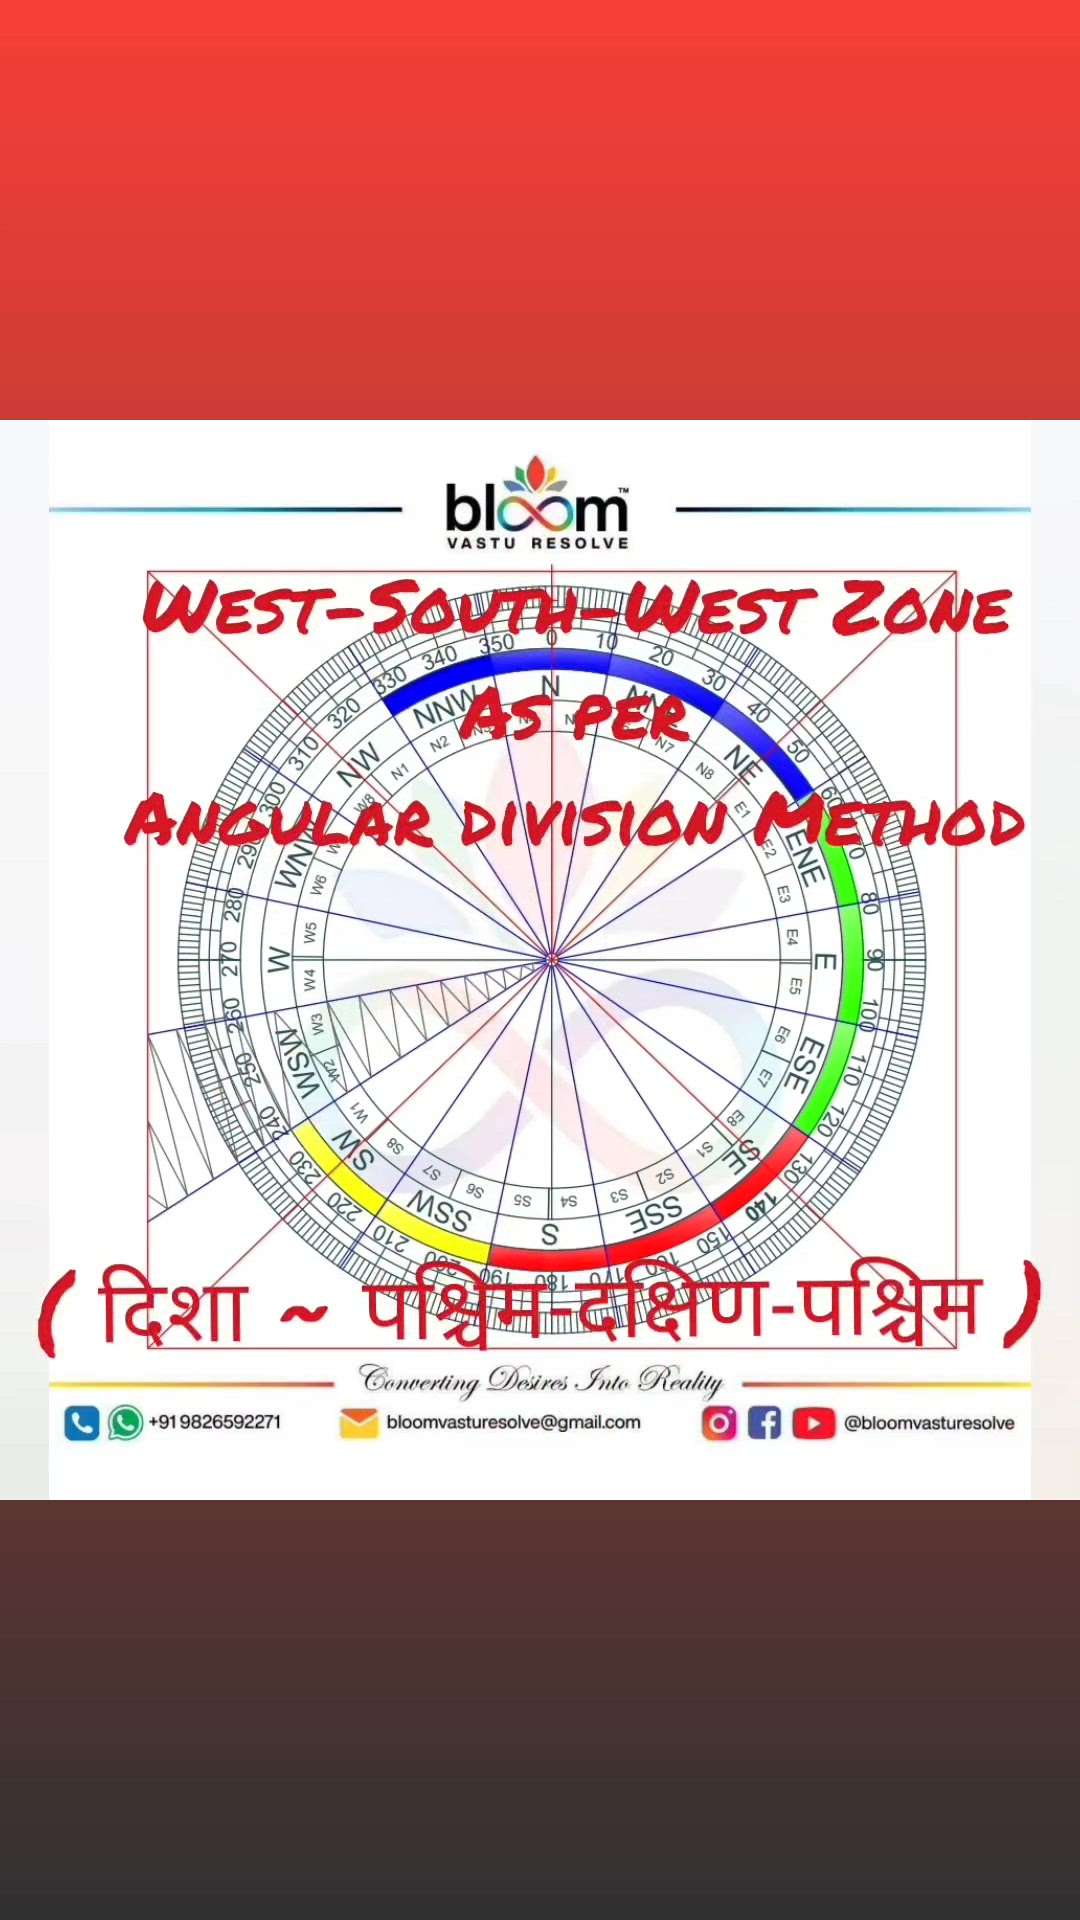 Your queries and comments are always welcome.
For more Vastu please follow @bloomvasturesolve
on YouTube, Instagram & Facebook
.
.
For personal consultation, feel free to contact certified MahaVastu Expert through
M - 9826592271
Or
bloomvasturesolve@gmail.com

#vastu 
#mahavastu #mahavastuexpert
#bloomvasturesolve
#wallpainting 
#wallpaper 
#vastutips 
#wswzone